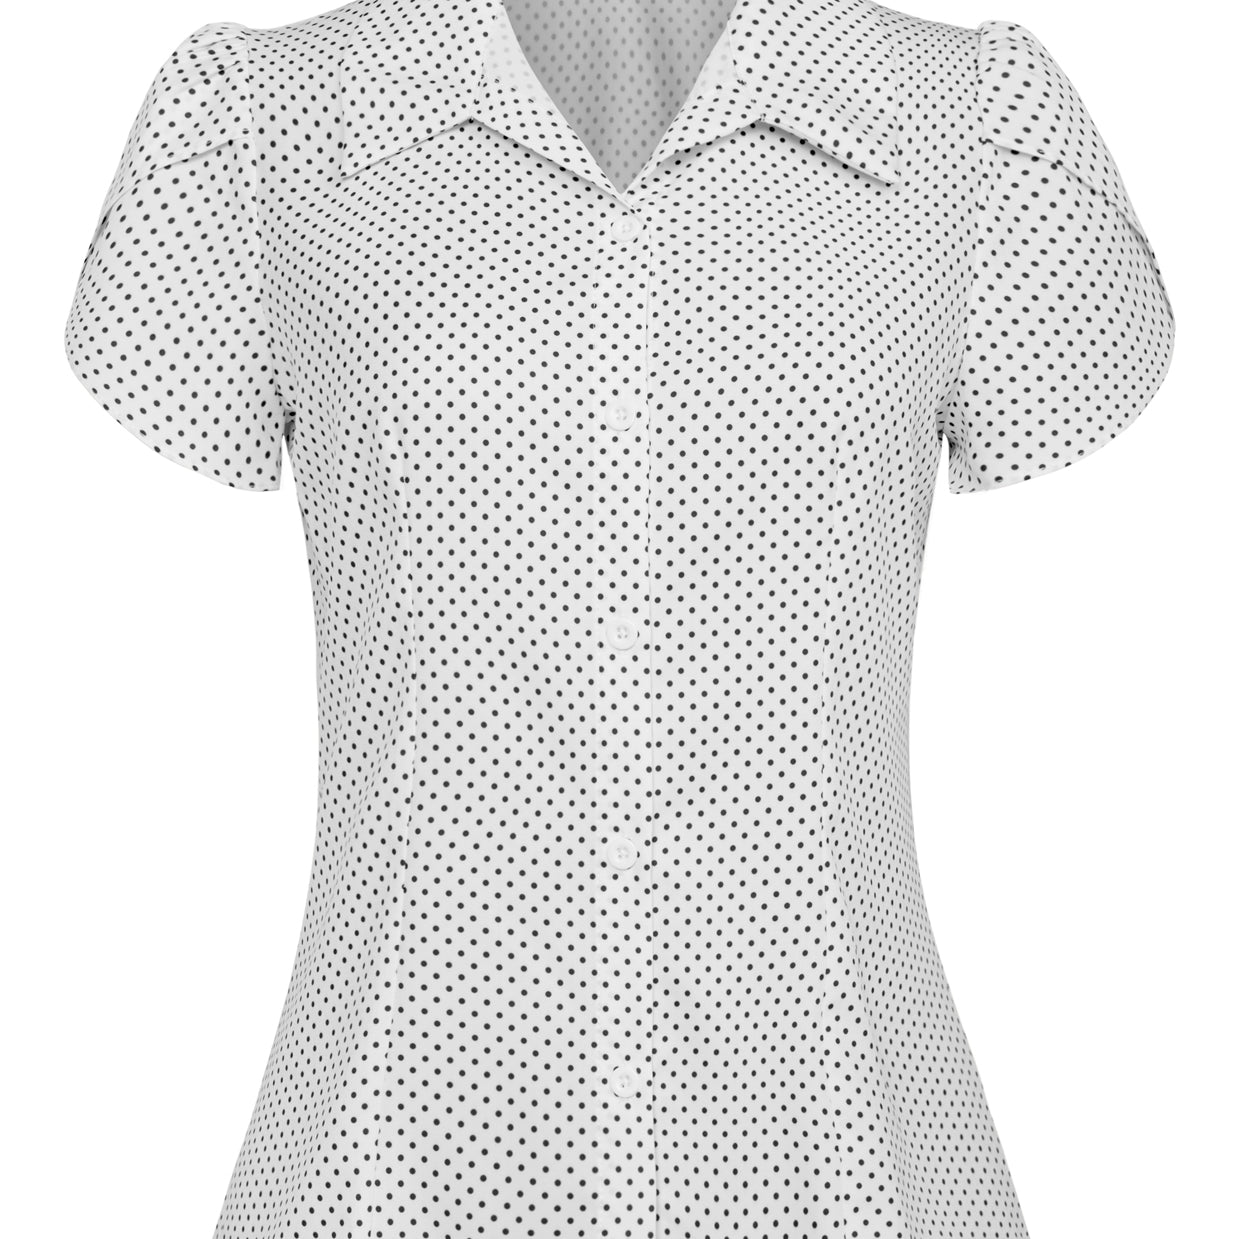 Summer Short Sleeve Button Down Blouse for Women V Neck Vintage Business Casual Shirts Tops